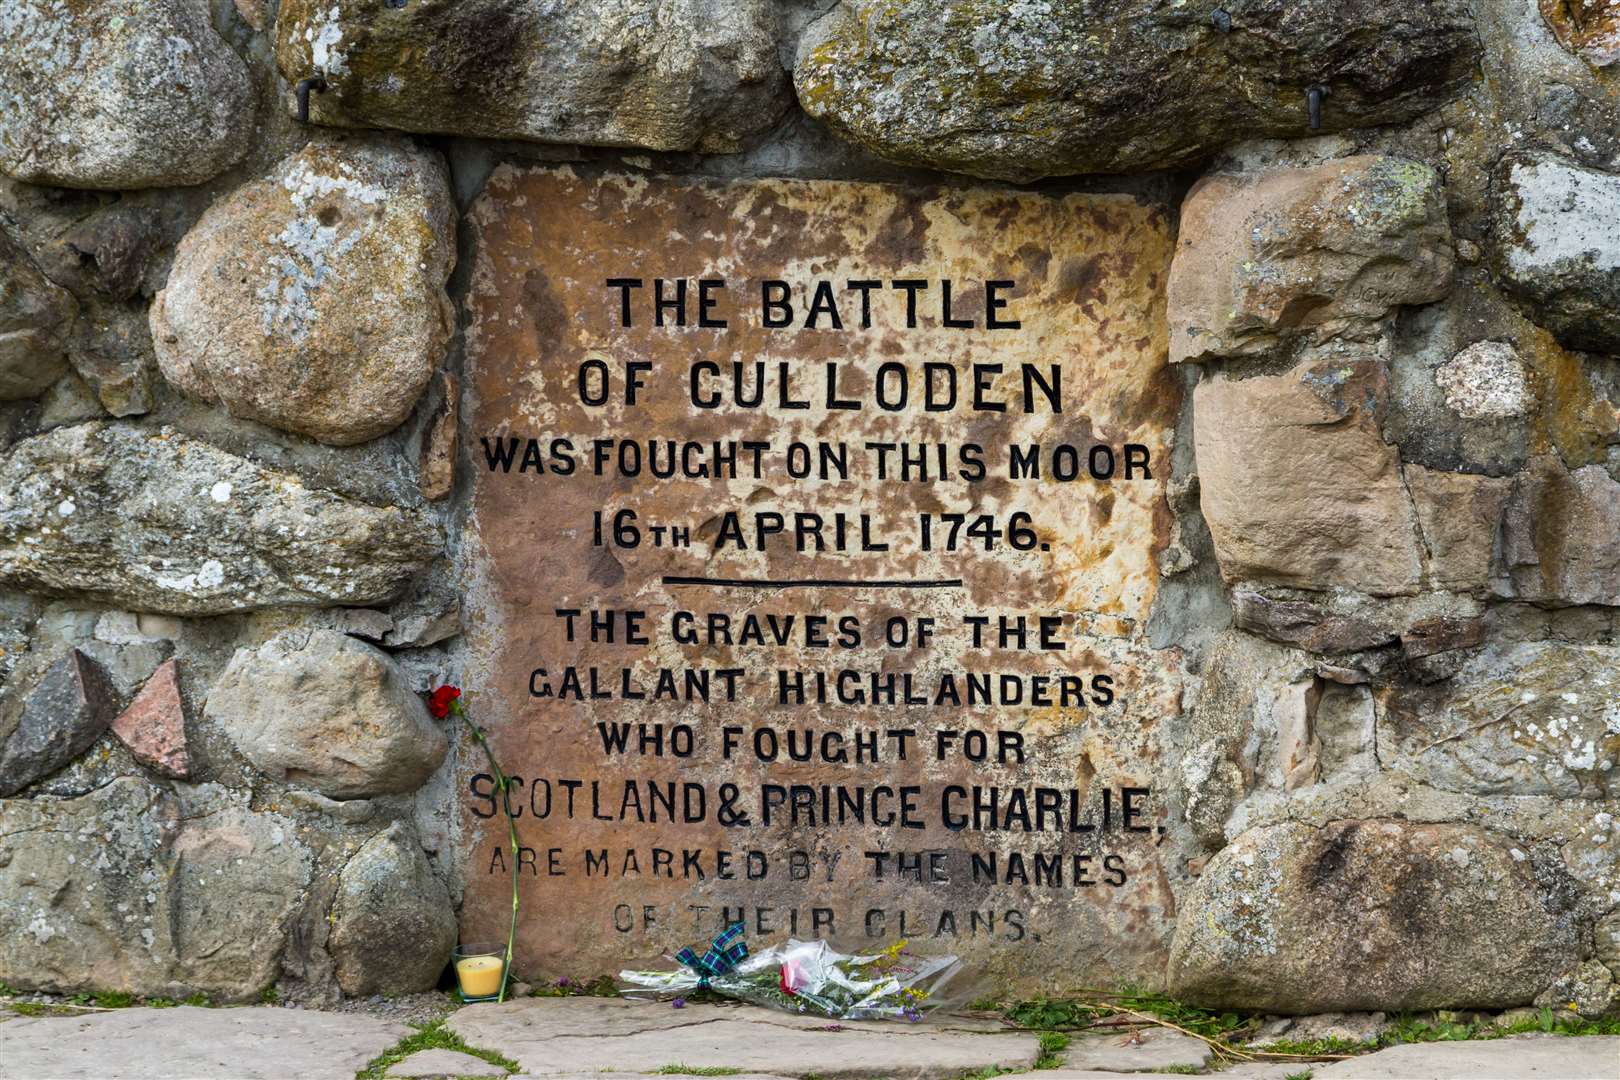 The Battle of Culloden took place just weeks after the Skirmish at Tongue.